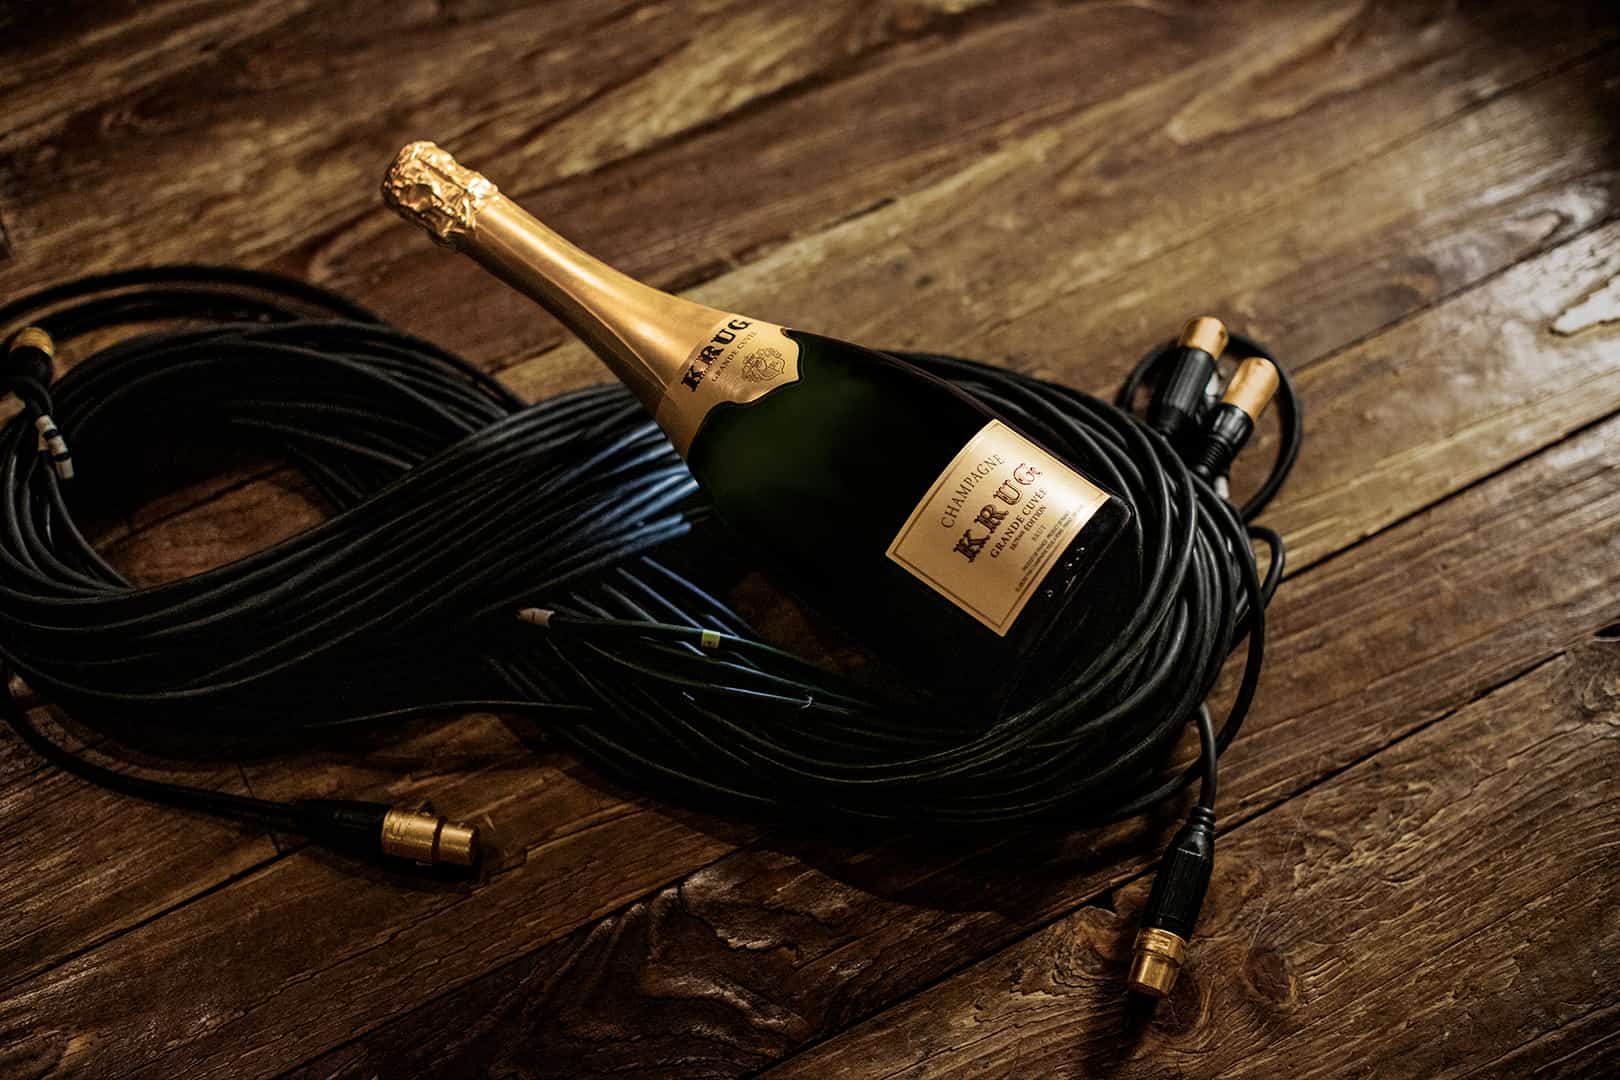 , Immerse into the creation of Krug with evocative music